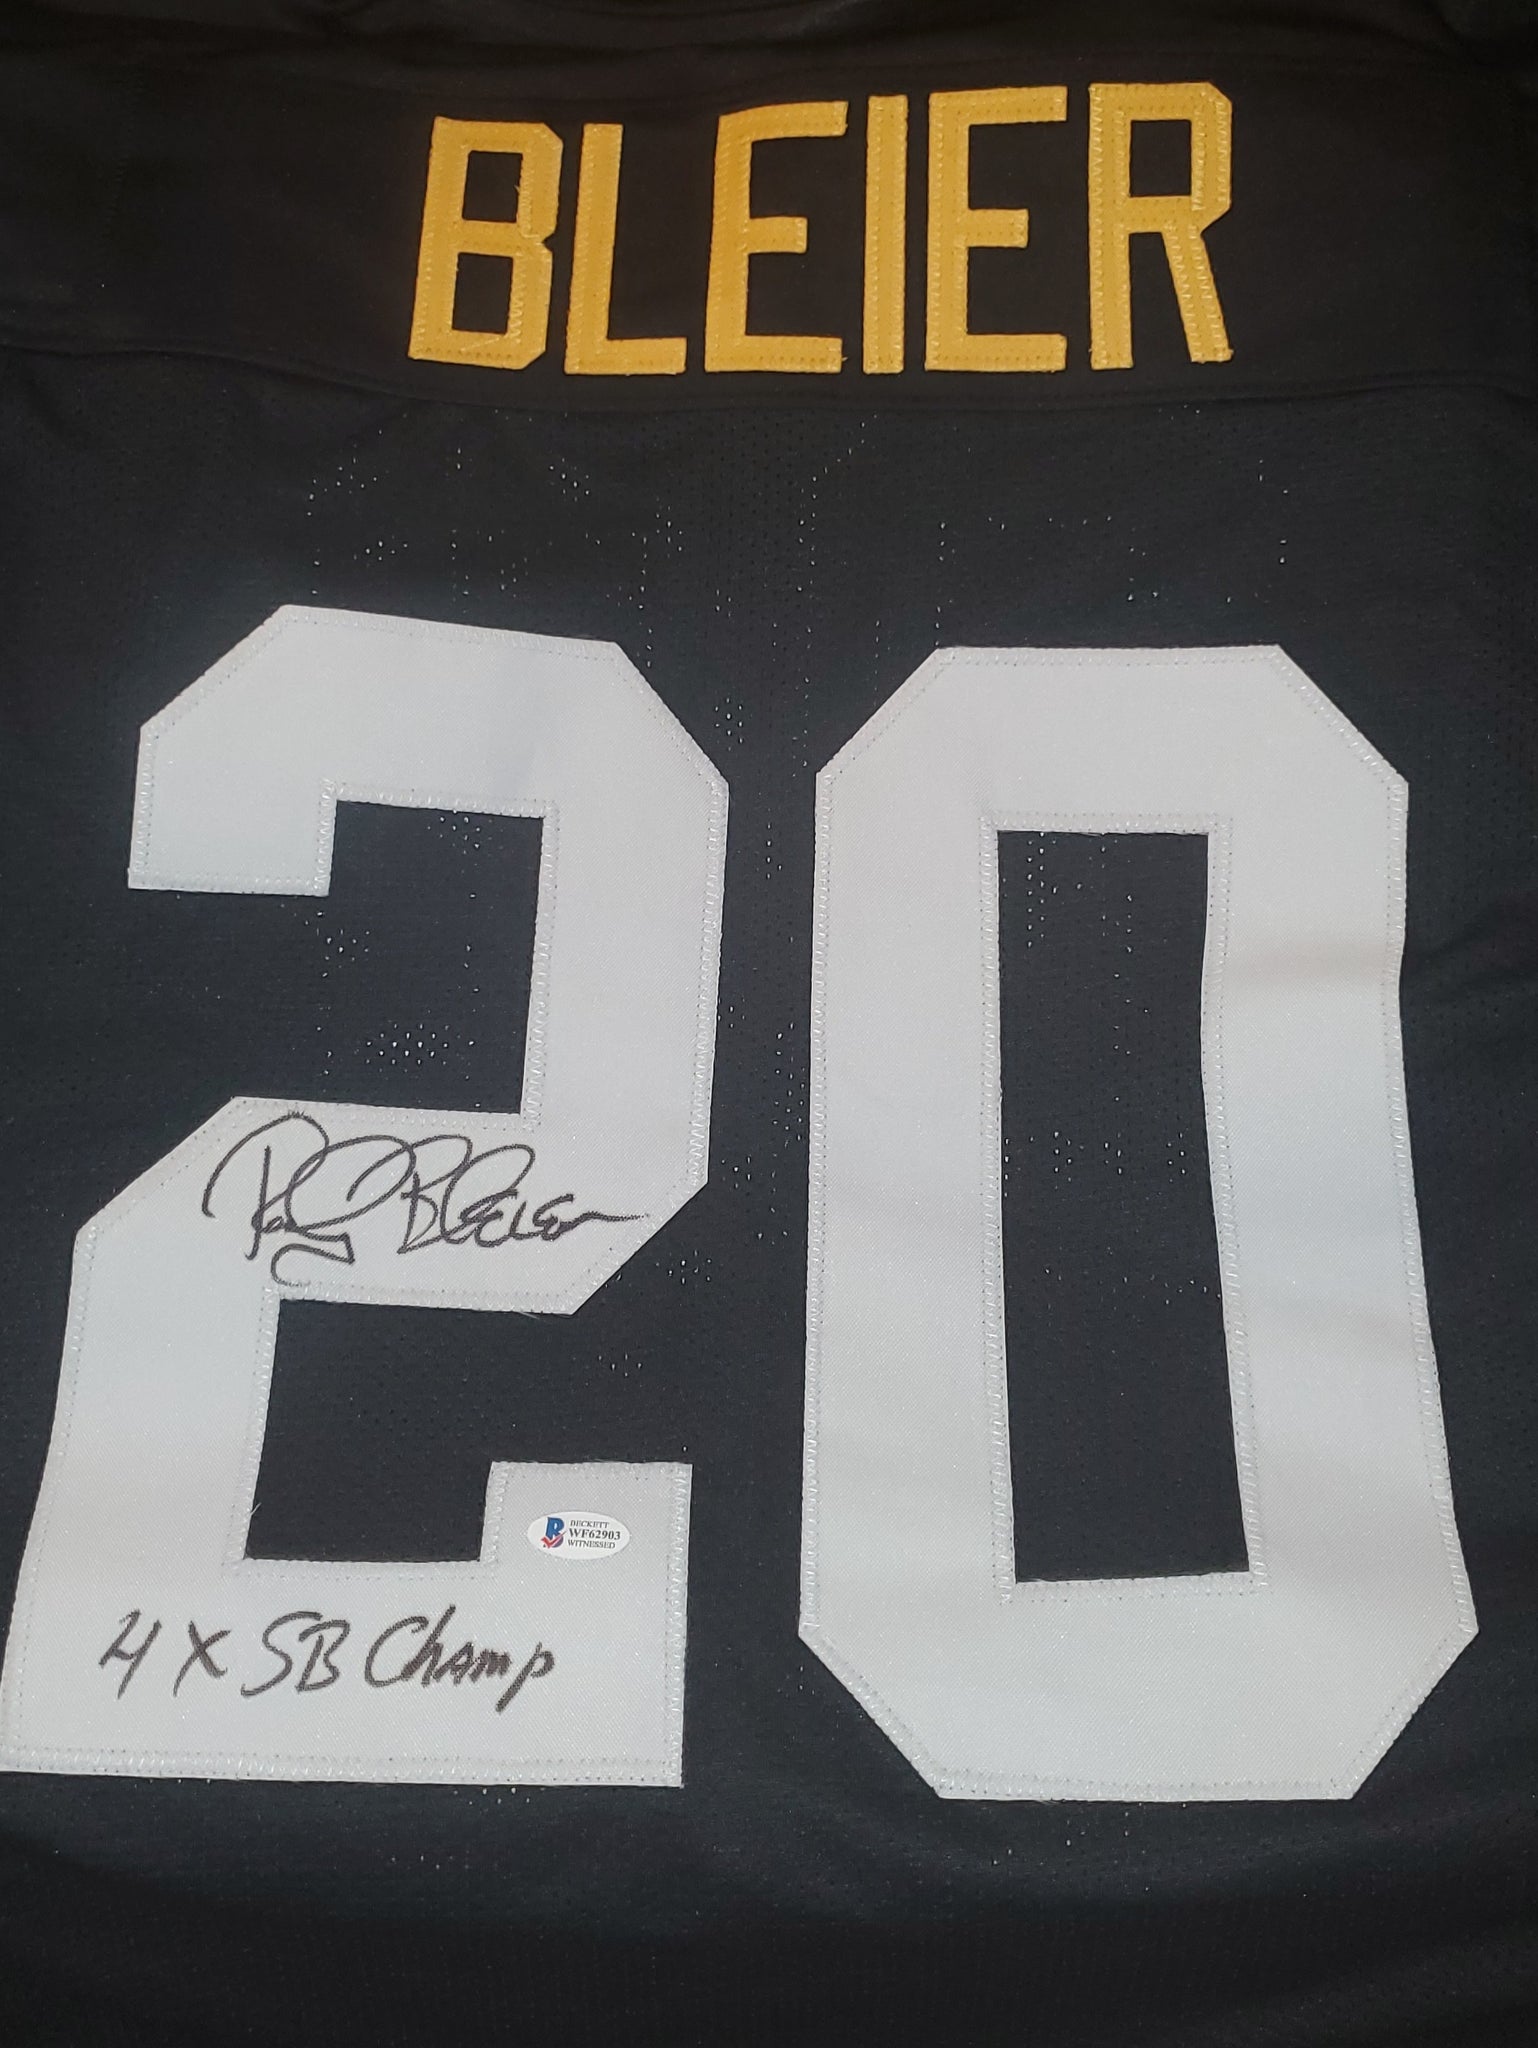 Rocky Bleier Autographed Mid Sleeve Jersey with 4x Super Bowl Champ Inscription (BAS)